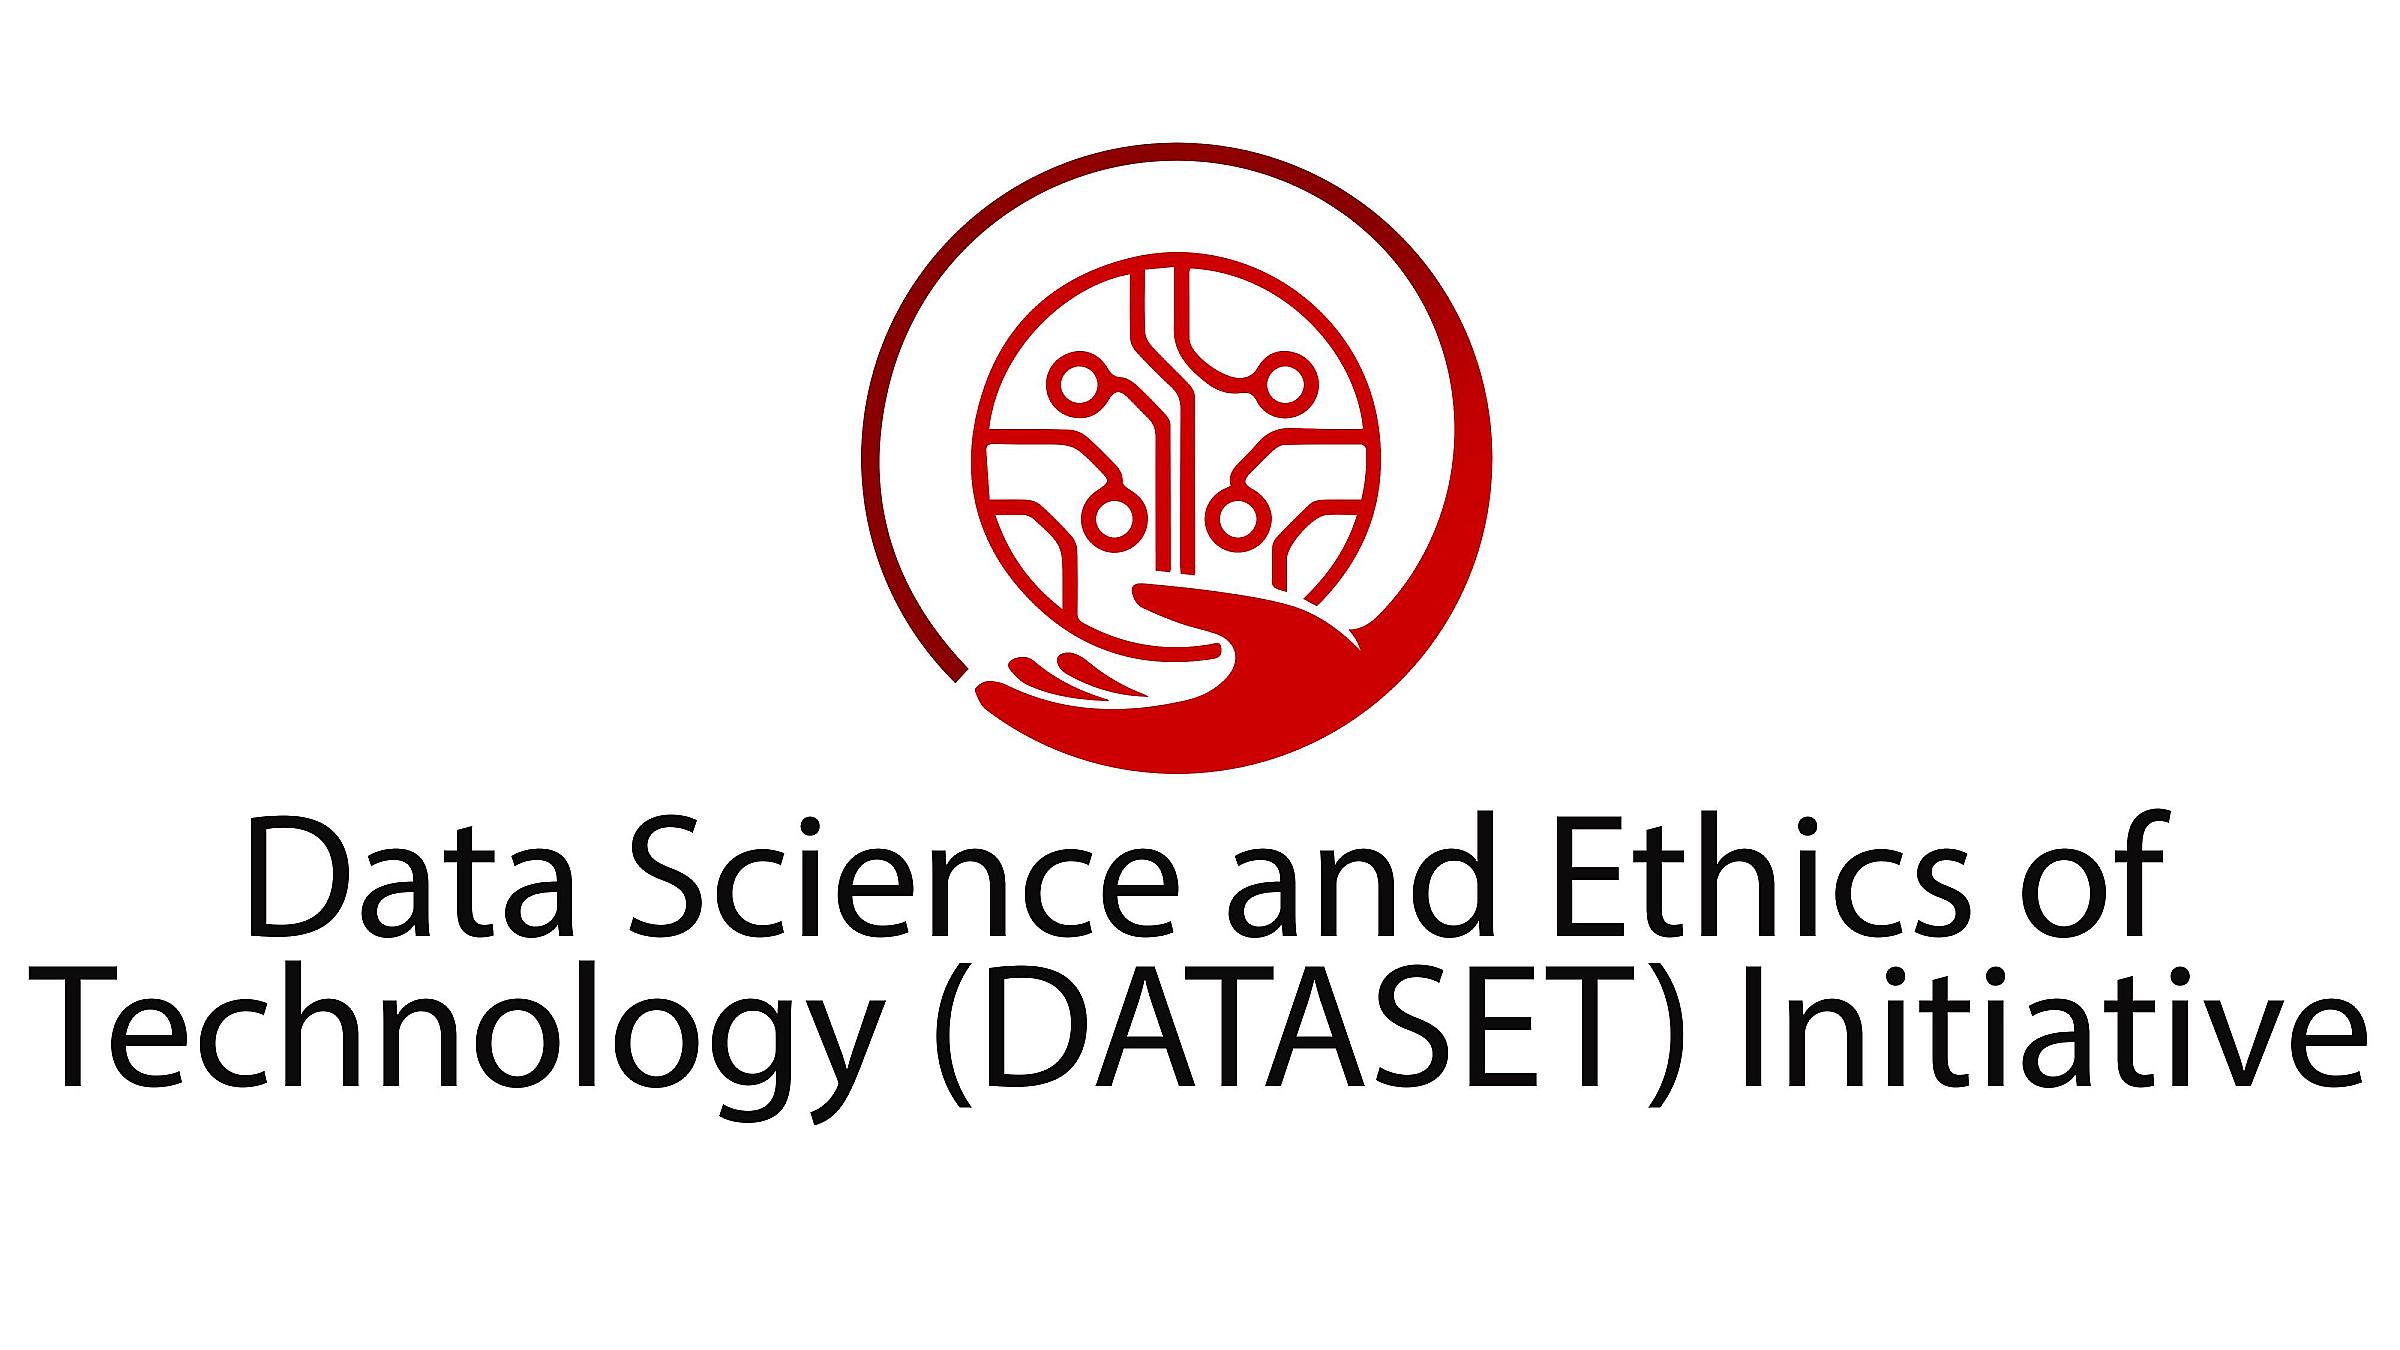 Data Science and Ethics of Technology (DATASET) Initiative